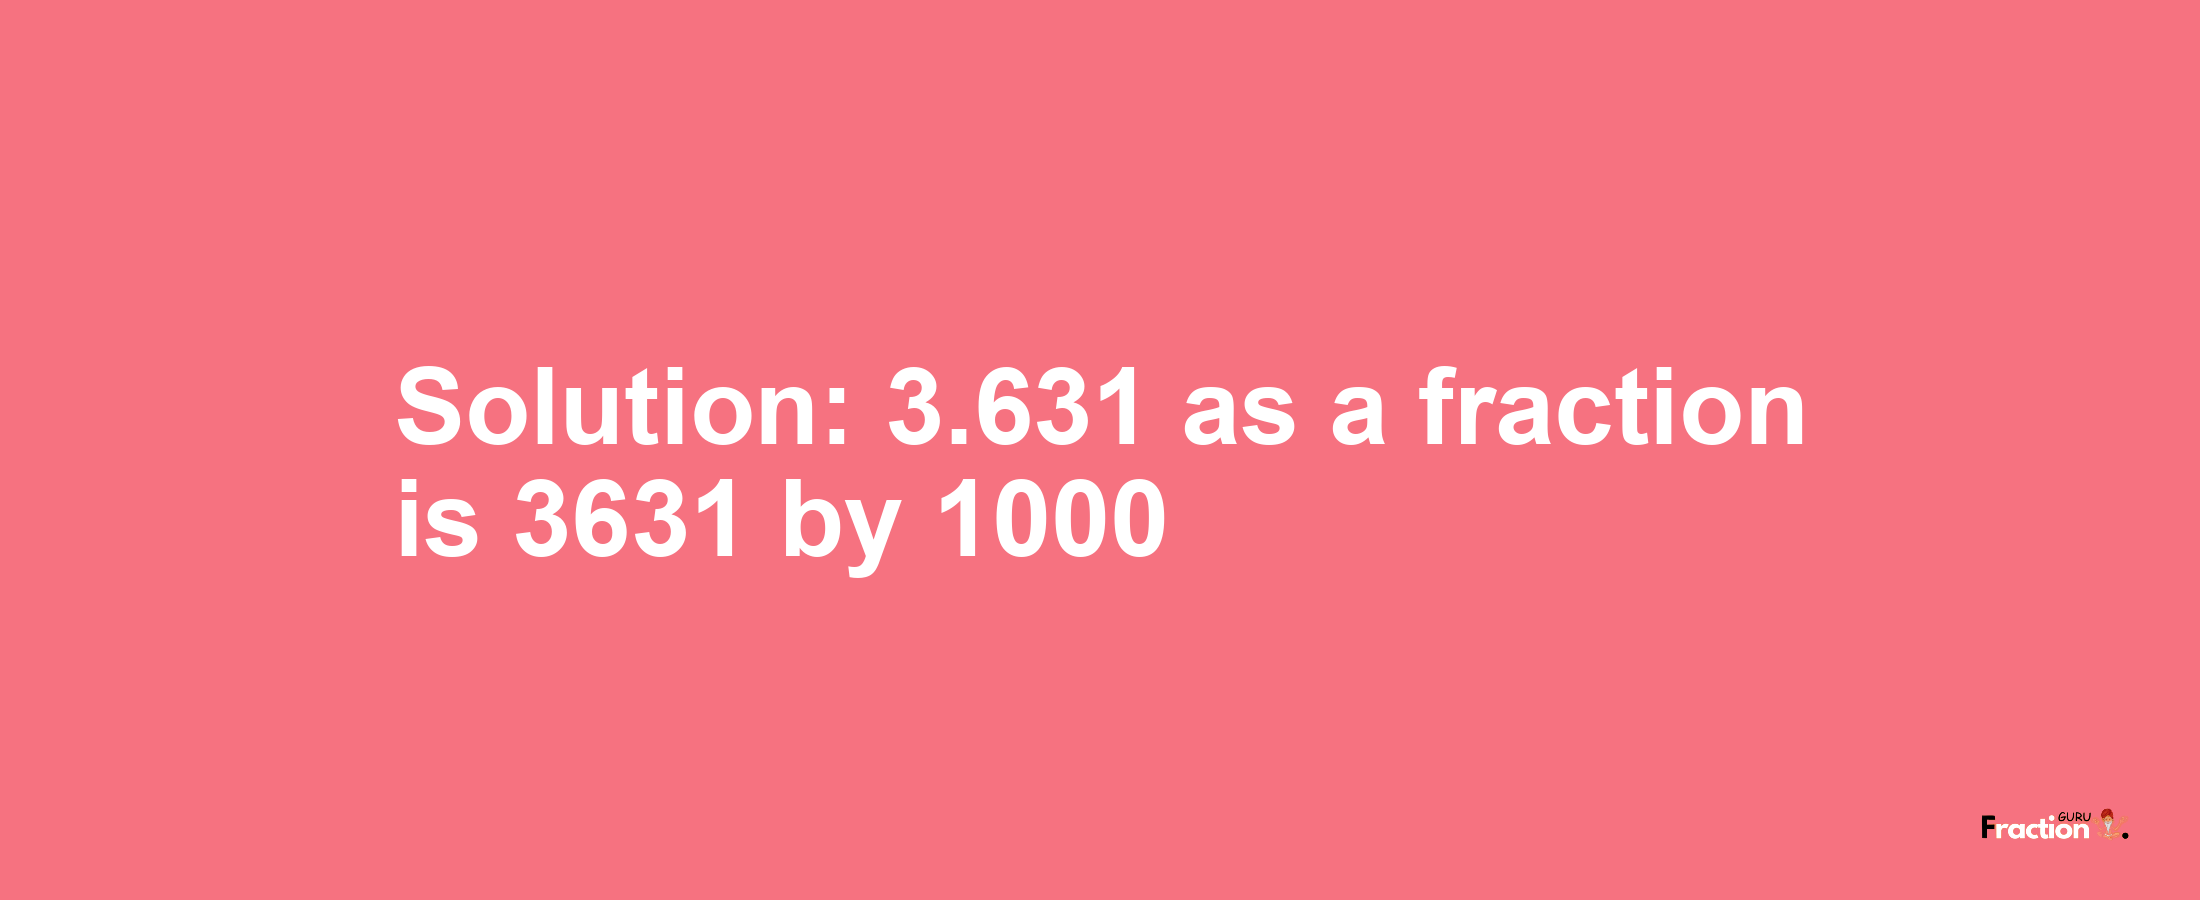 Solution:3.631 as a fraction is 3631/1000